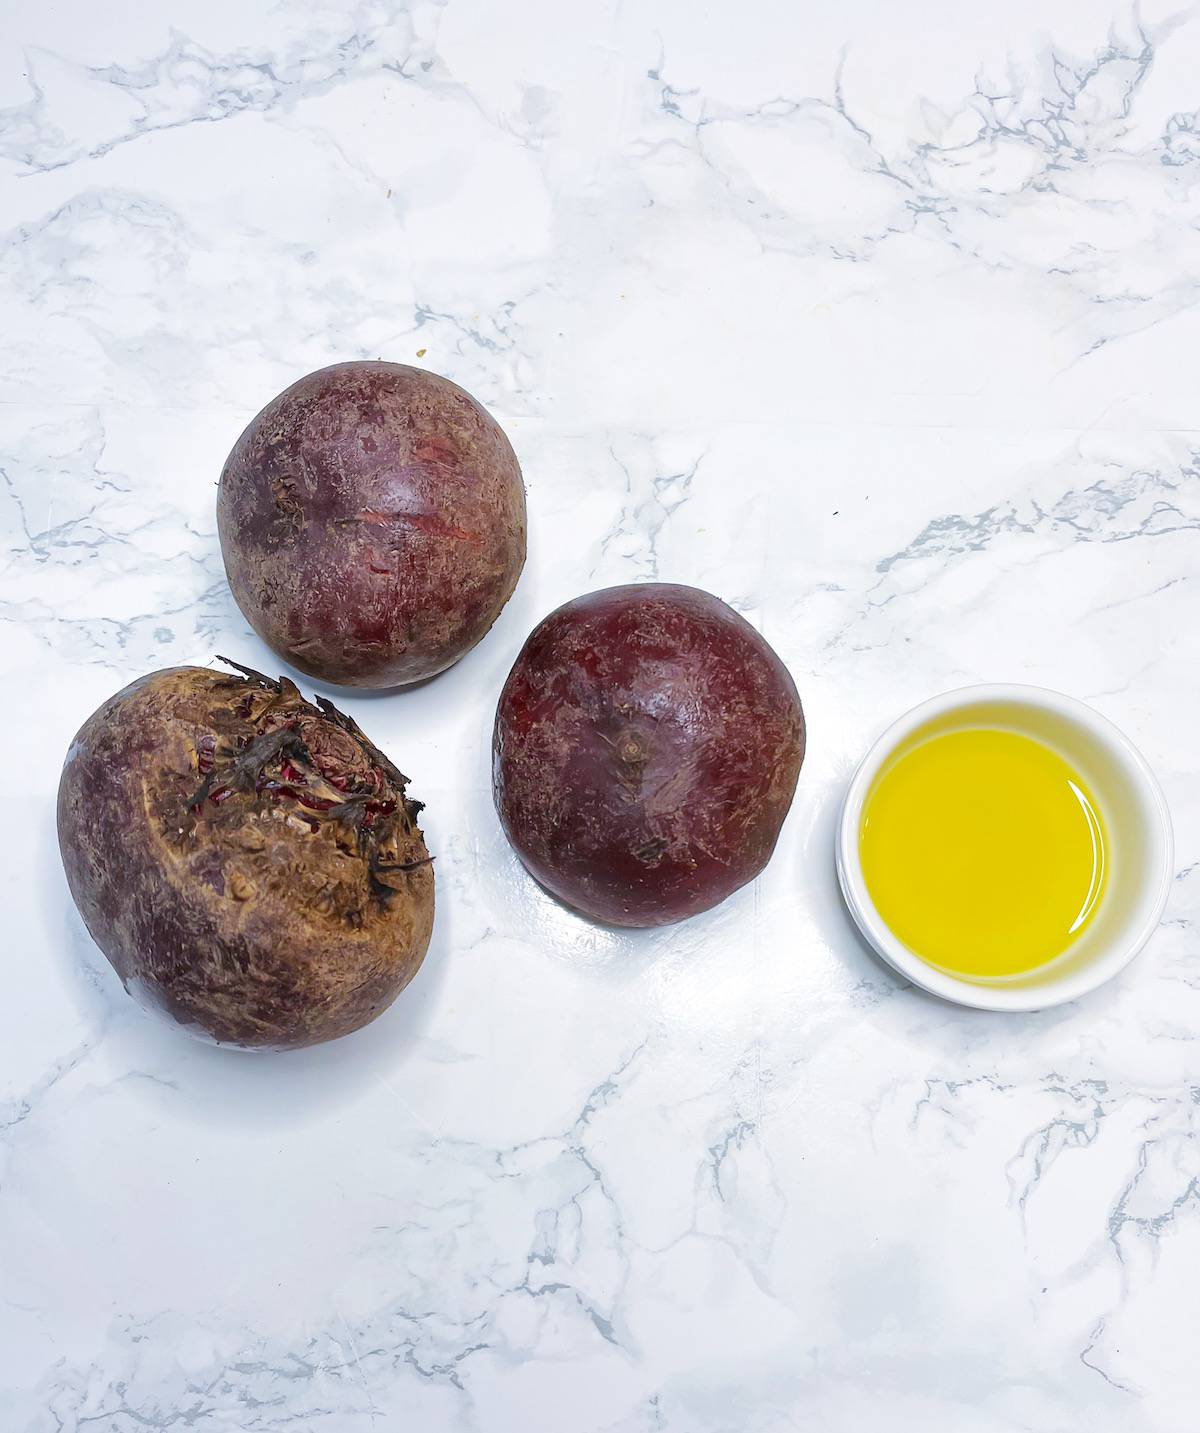 Recipe ingredients on a table including 3 large beets and a small bowl of olive oil